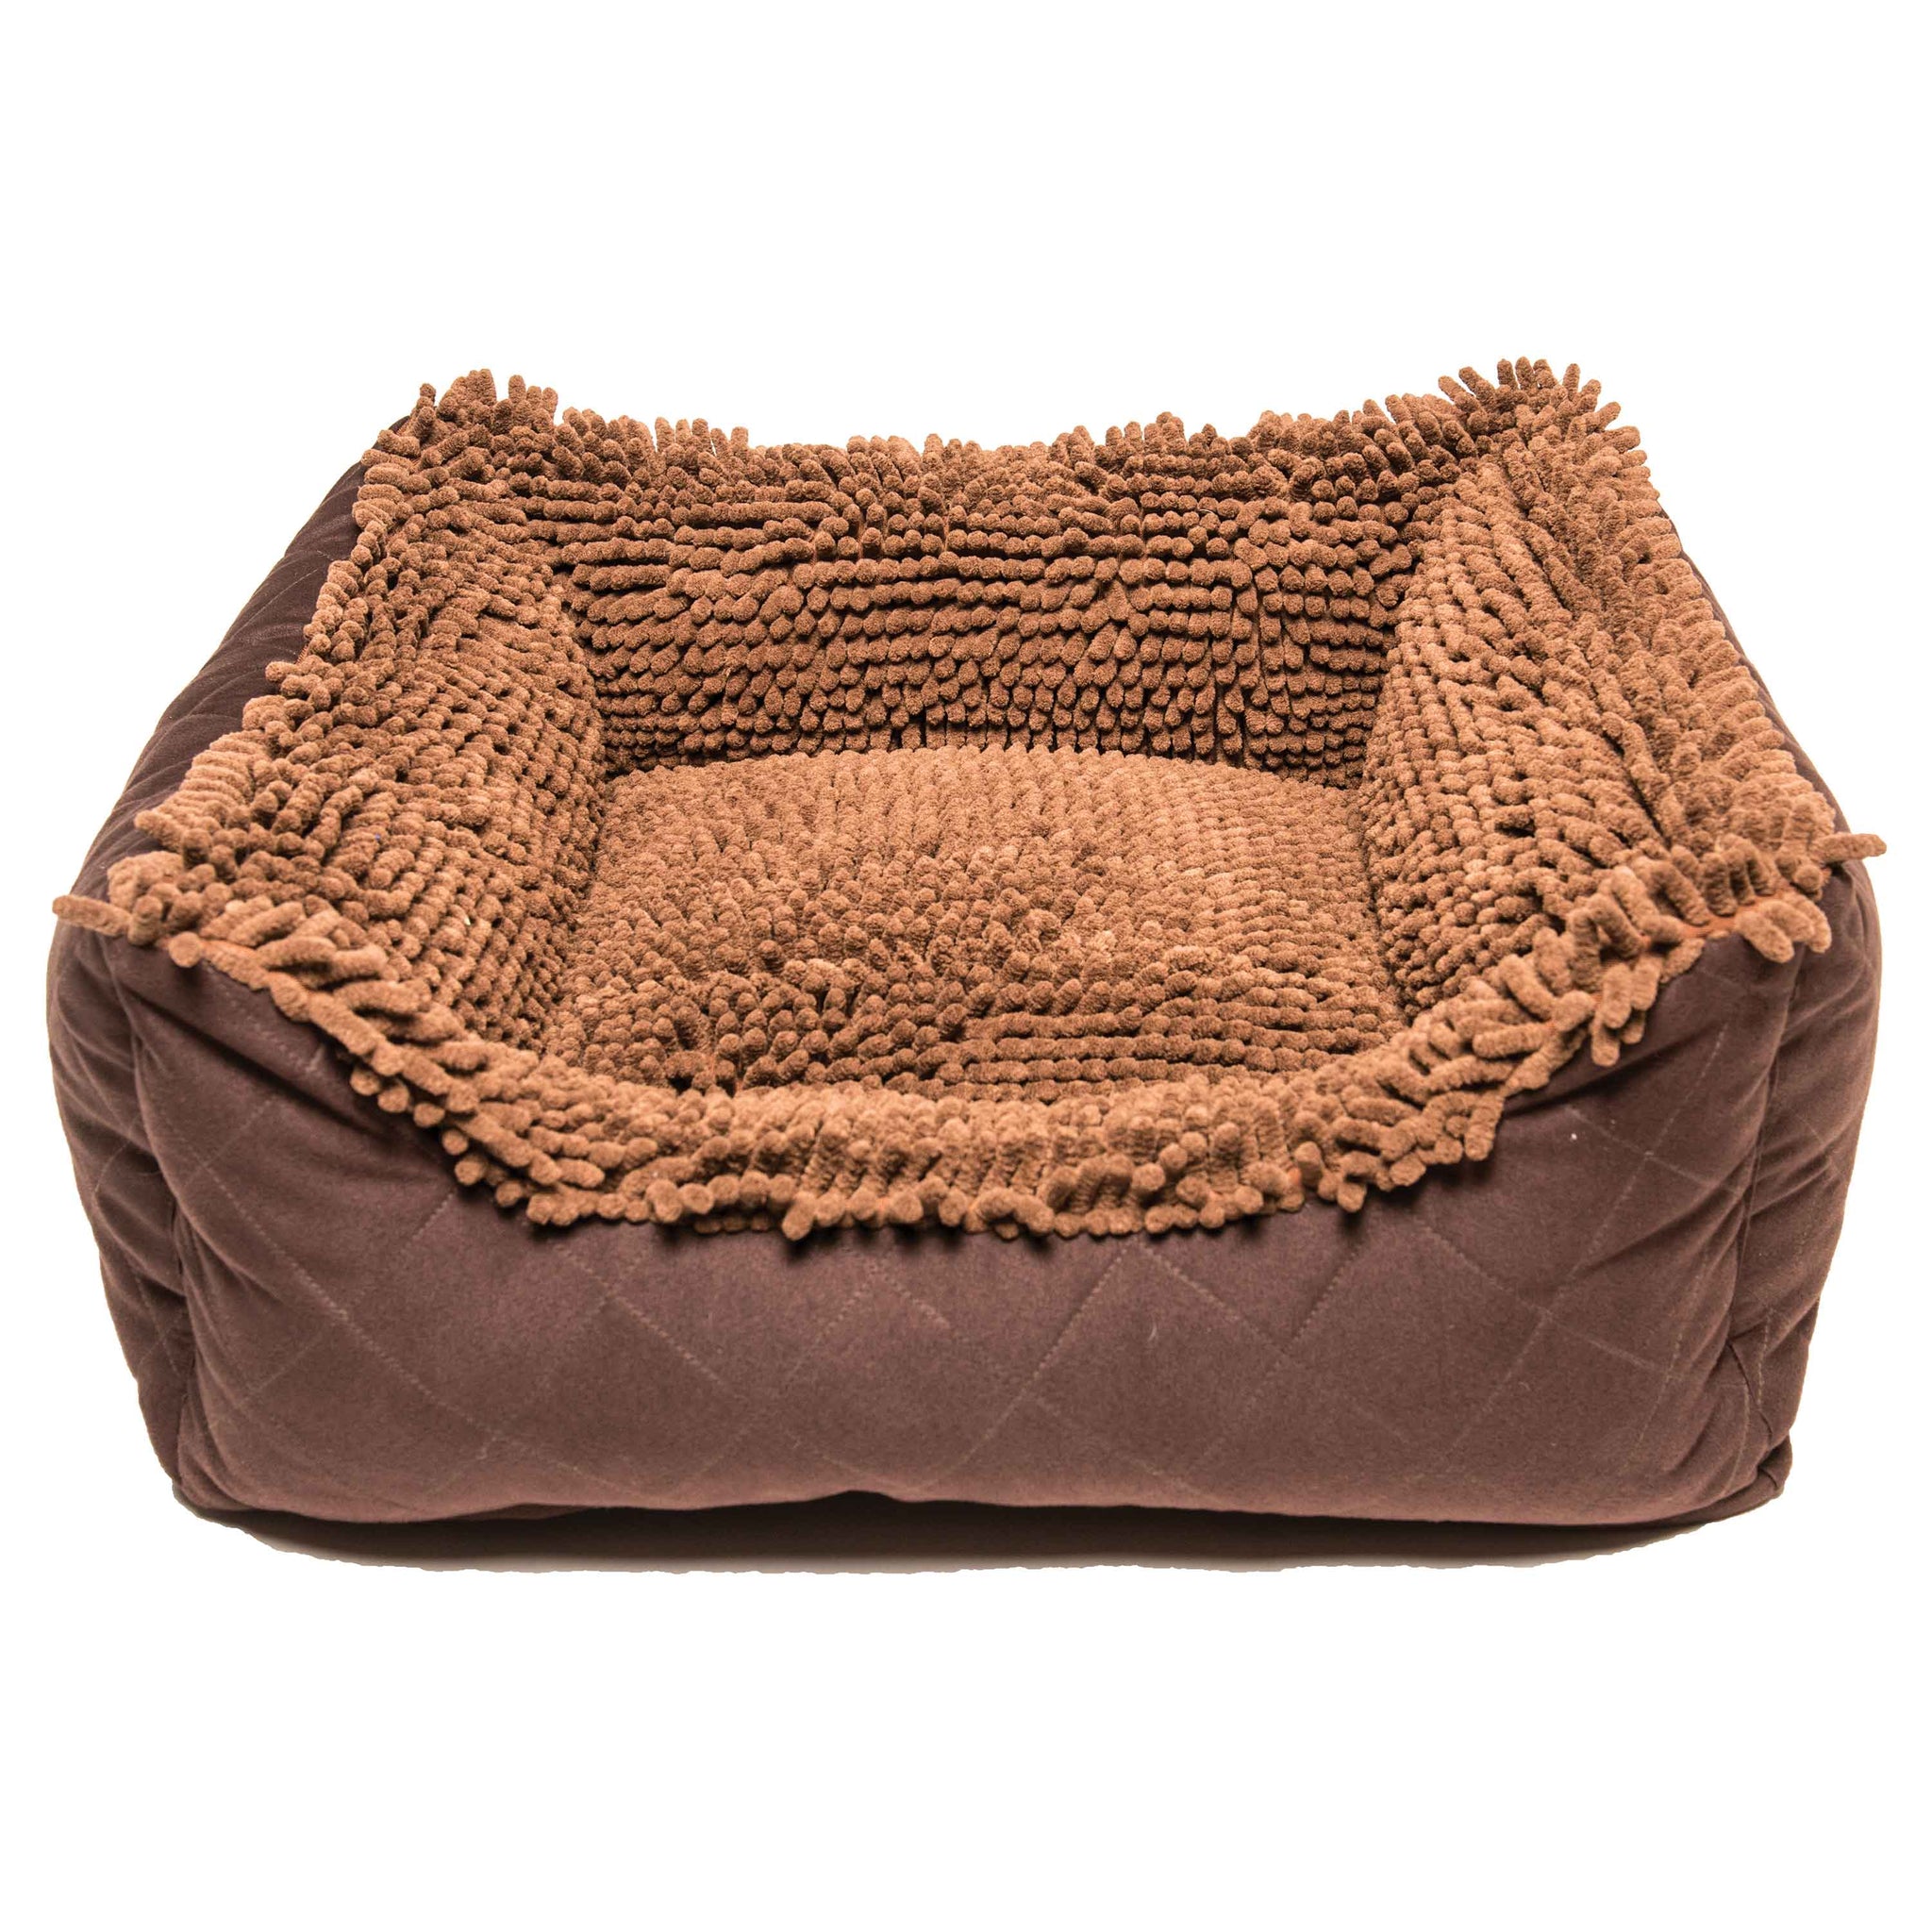 DGS Pet Products Dirty Dog Lounger Bed Medium Brown 26" x 24" x 8"